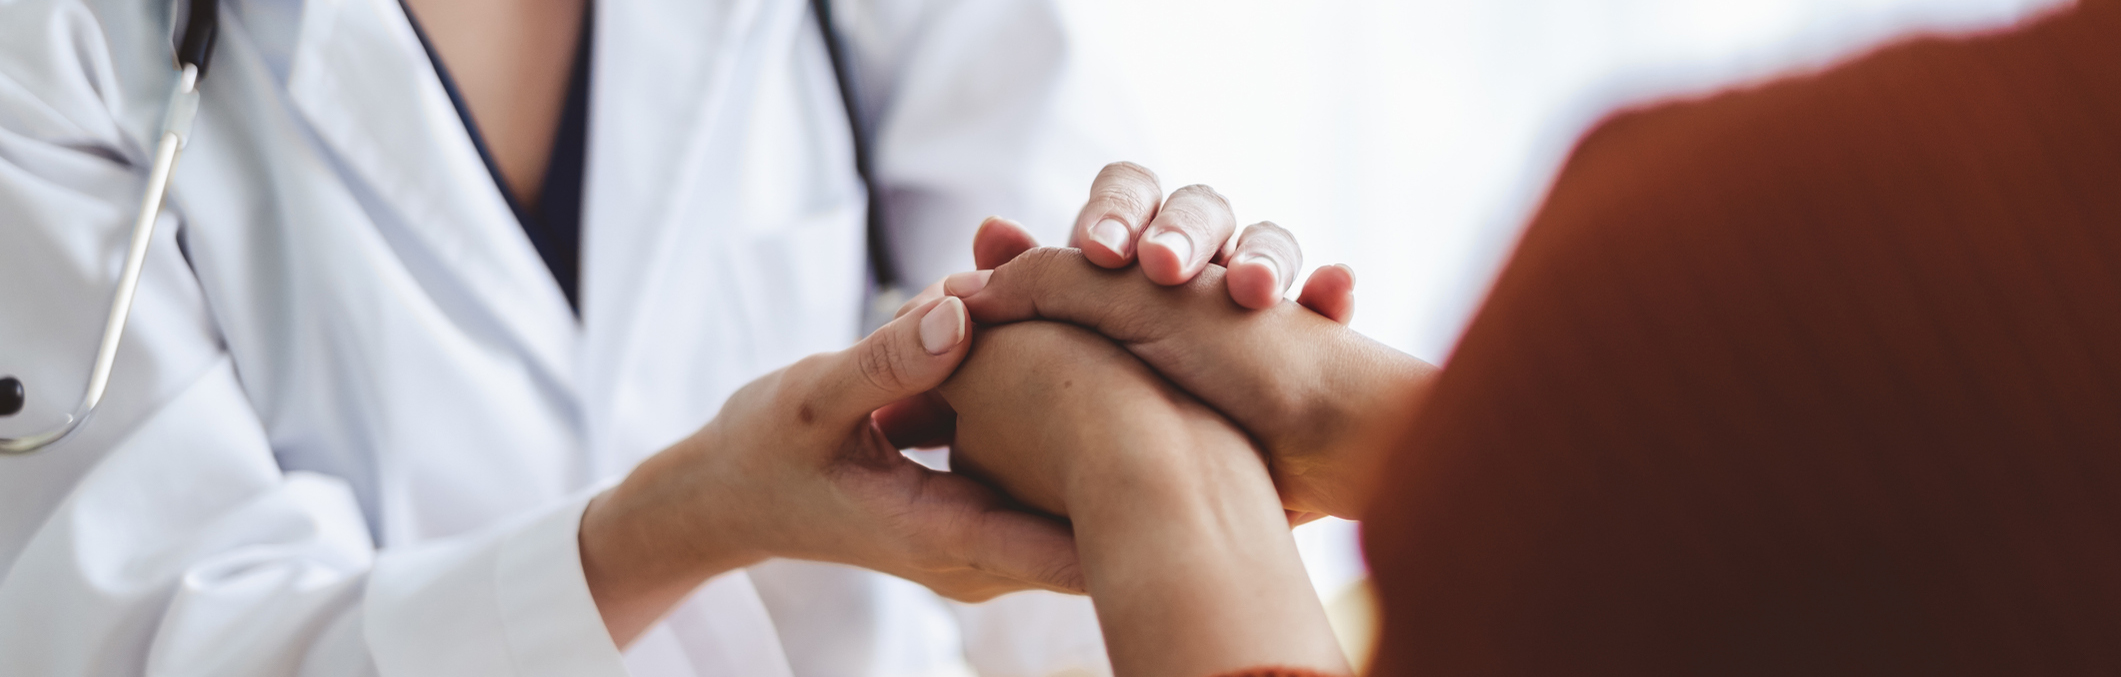 Close up of physician's hands holding a patient's hands